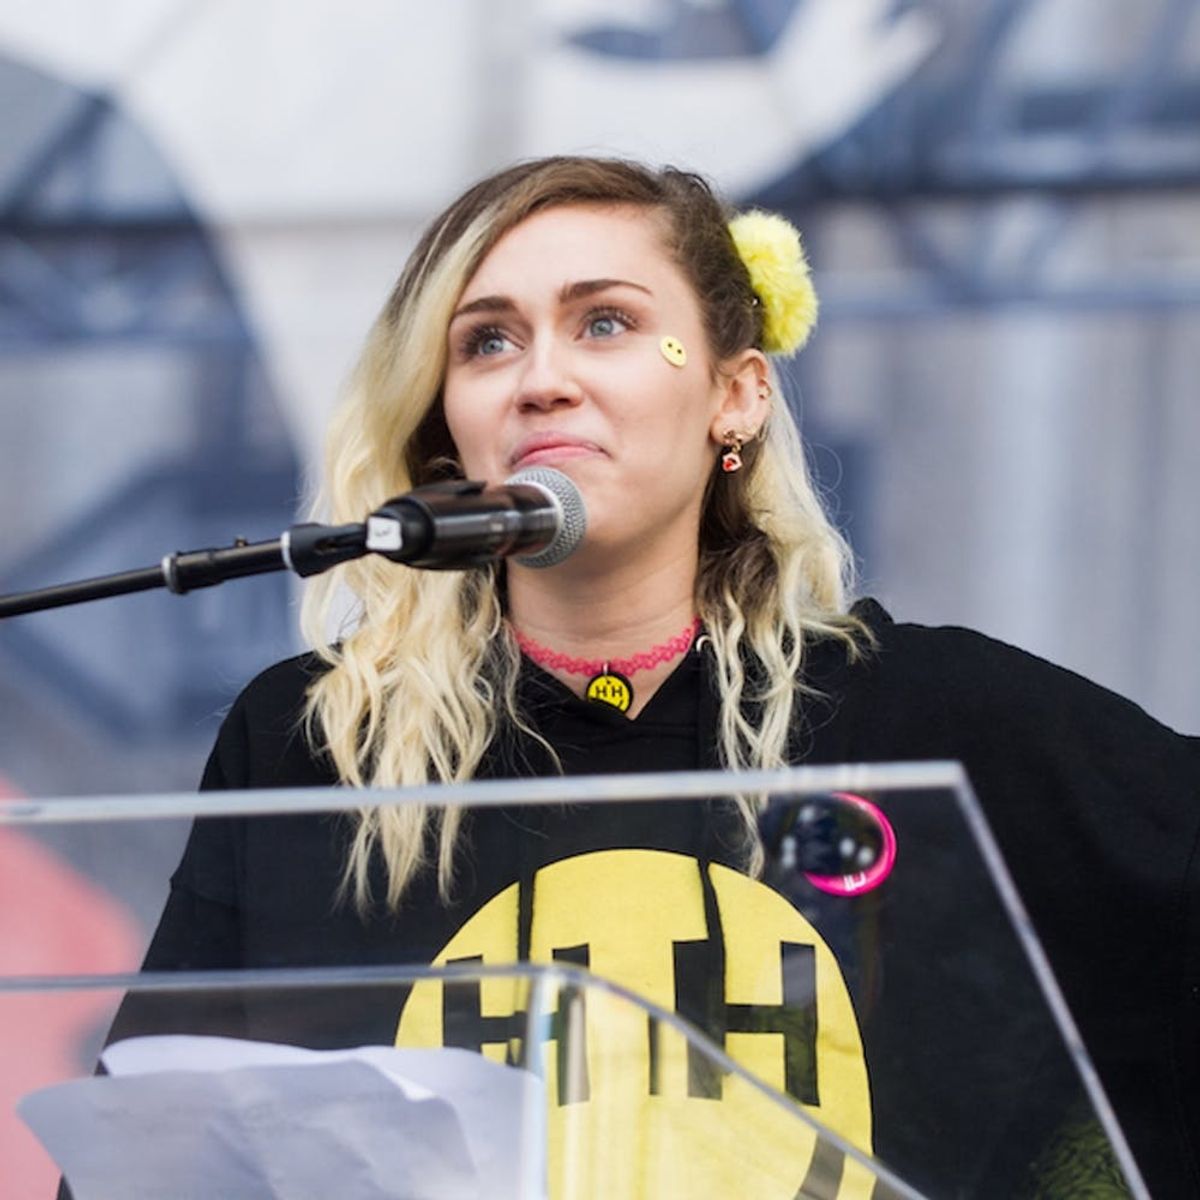 Why Miley Cyrus Predicts a Political Future for THIS High-Profile Teen